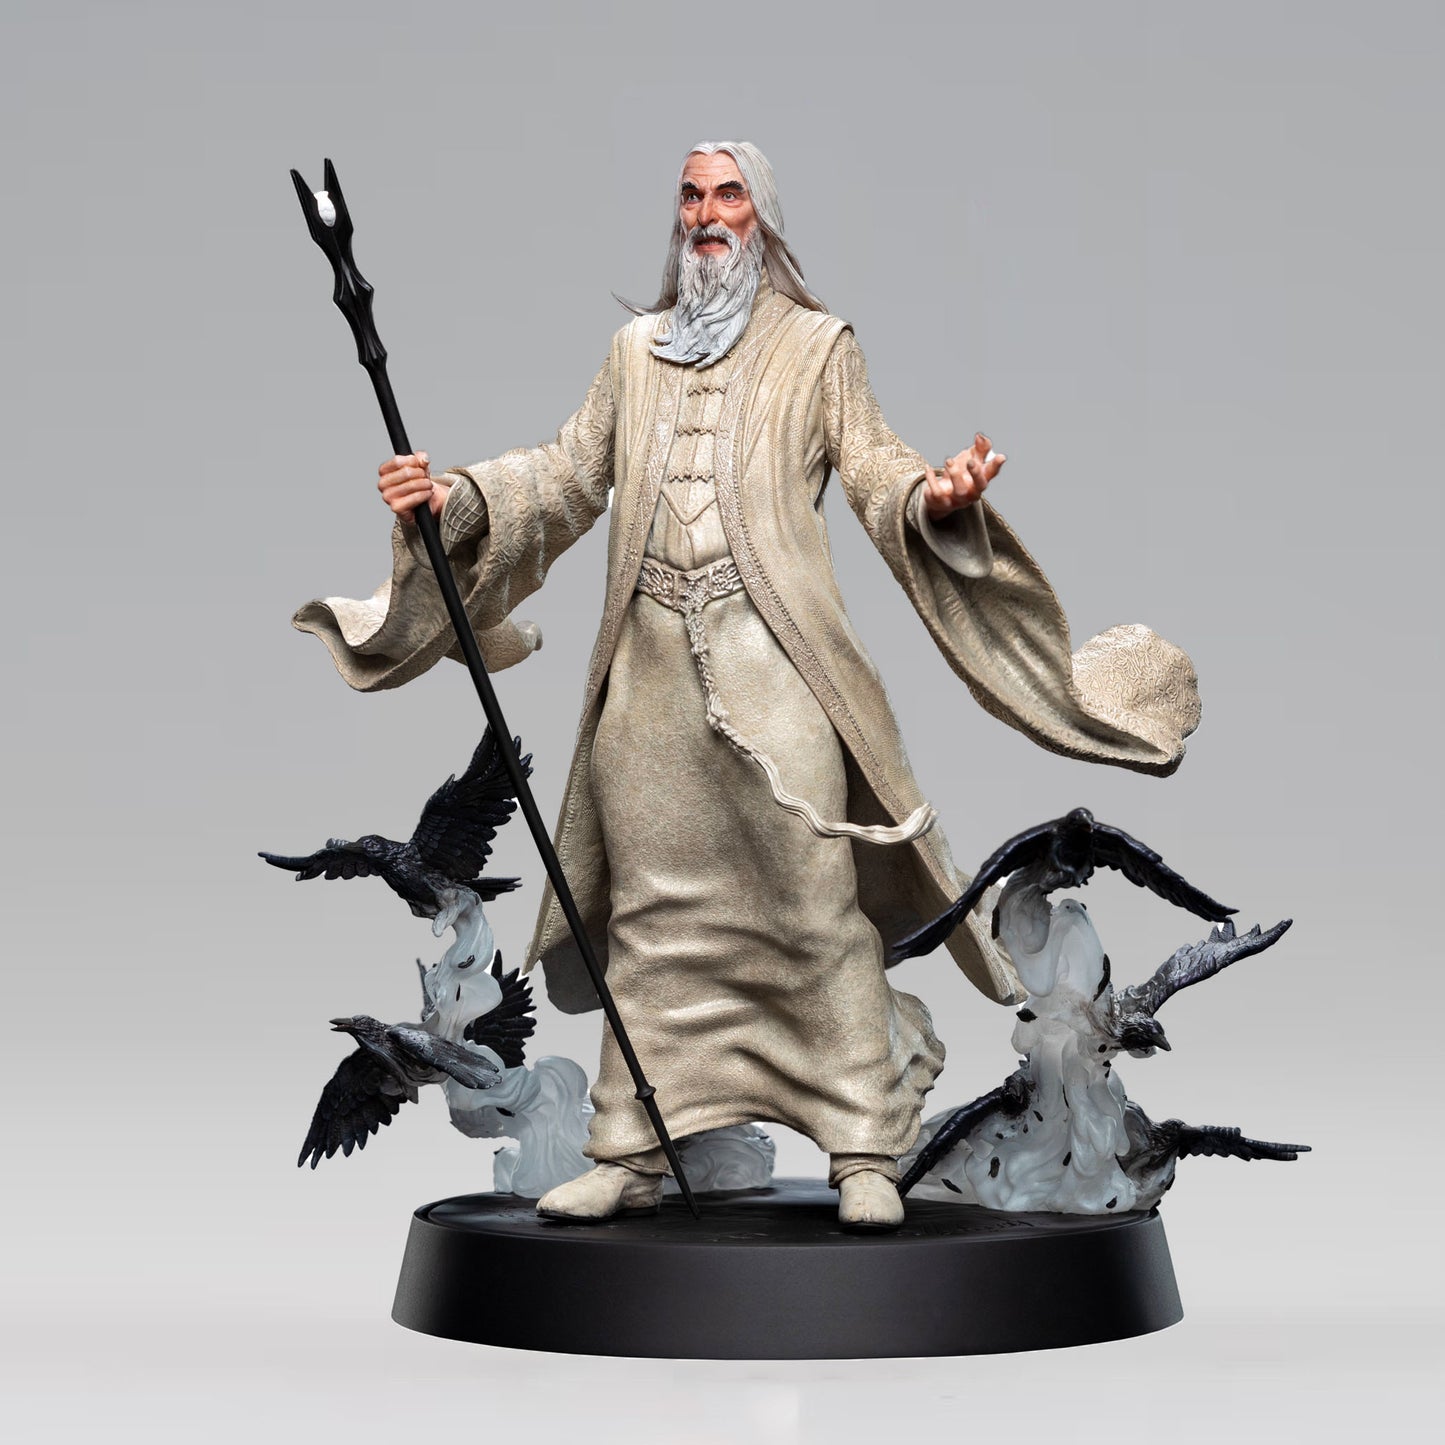 Saruman the White (The Lord of the Rings) Figures of Fandom Statue by Weta Workshop